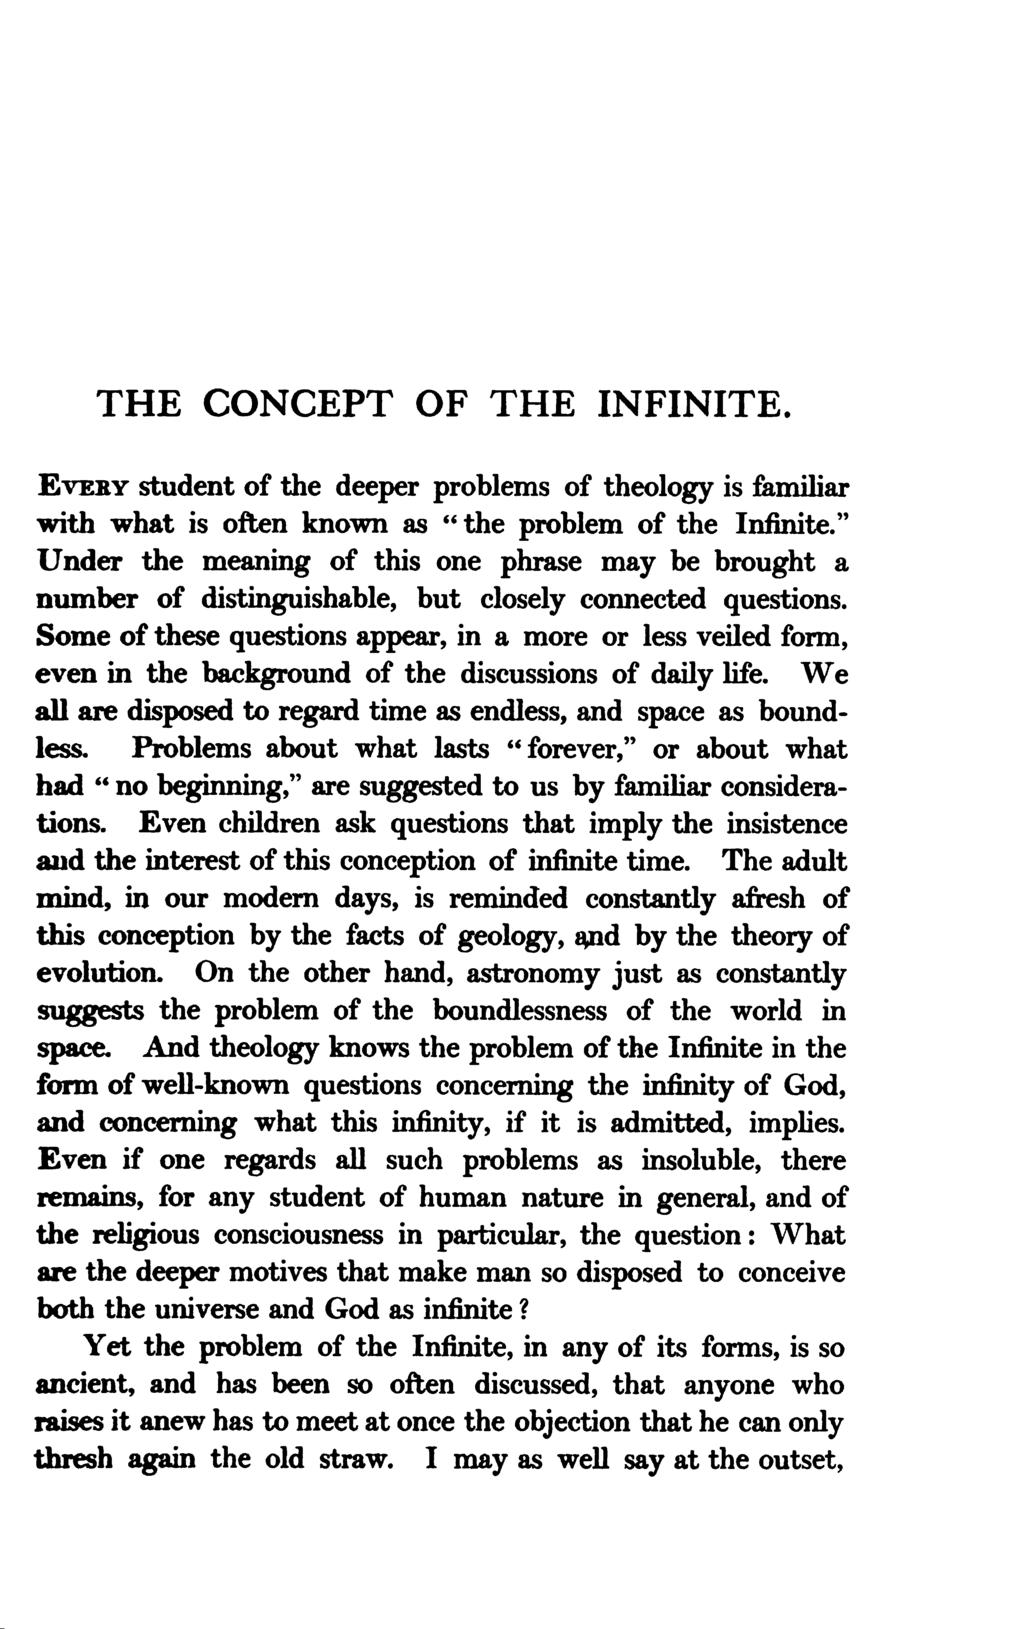 THE CONCEPT OF THE INFINITE. EvERY student of the deeper problems of theology fmilir withwht oftenknown s theproblemoftheinfinite.